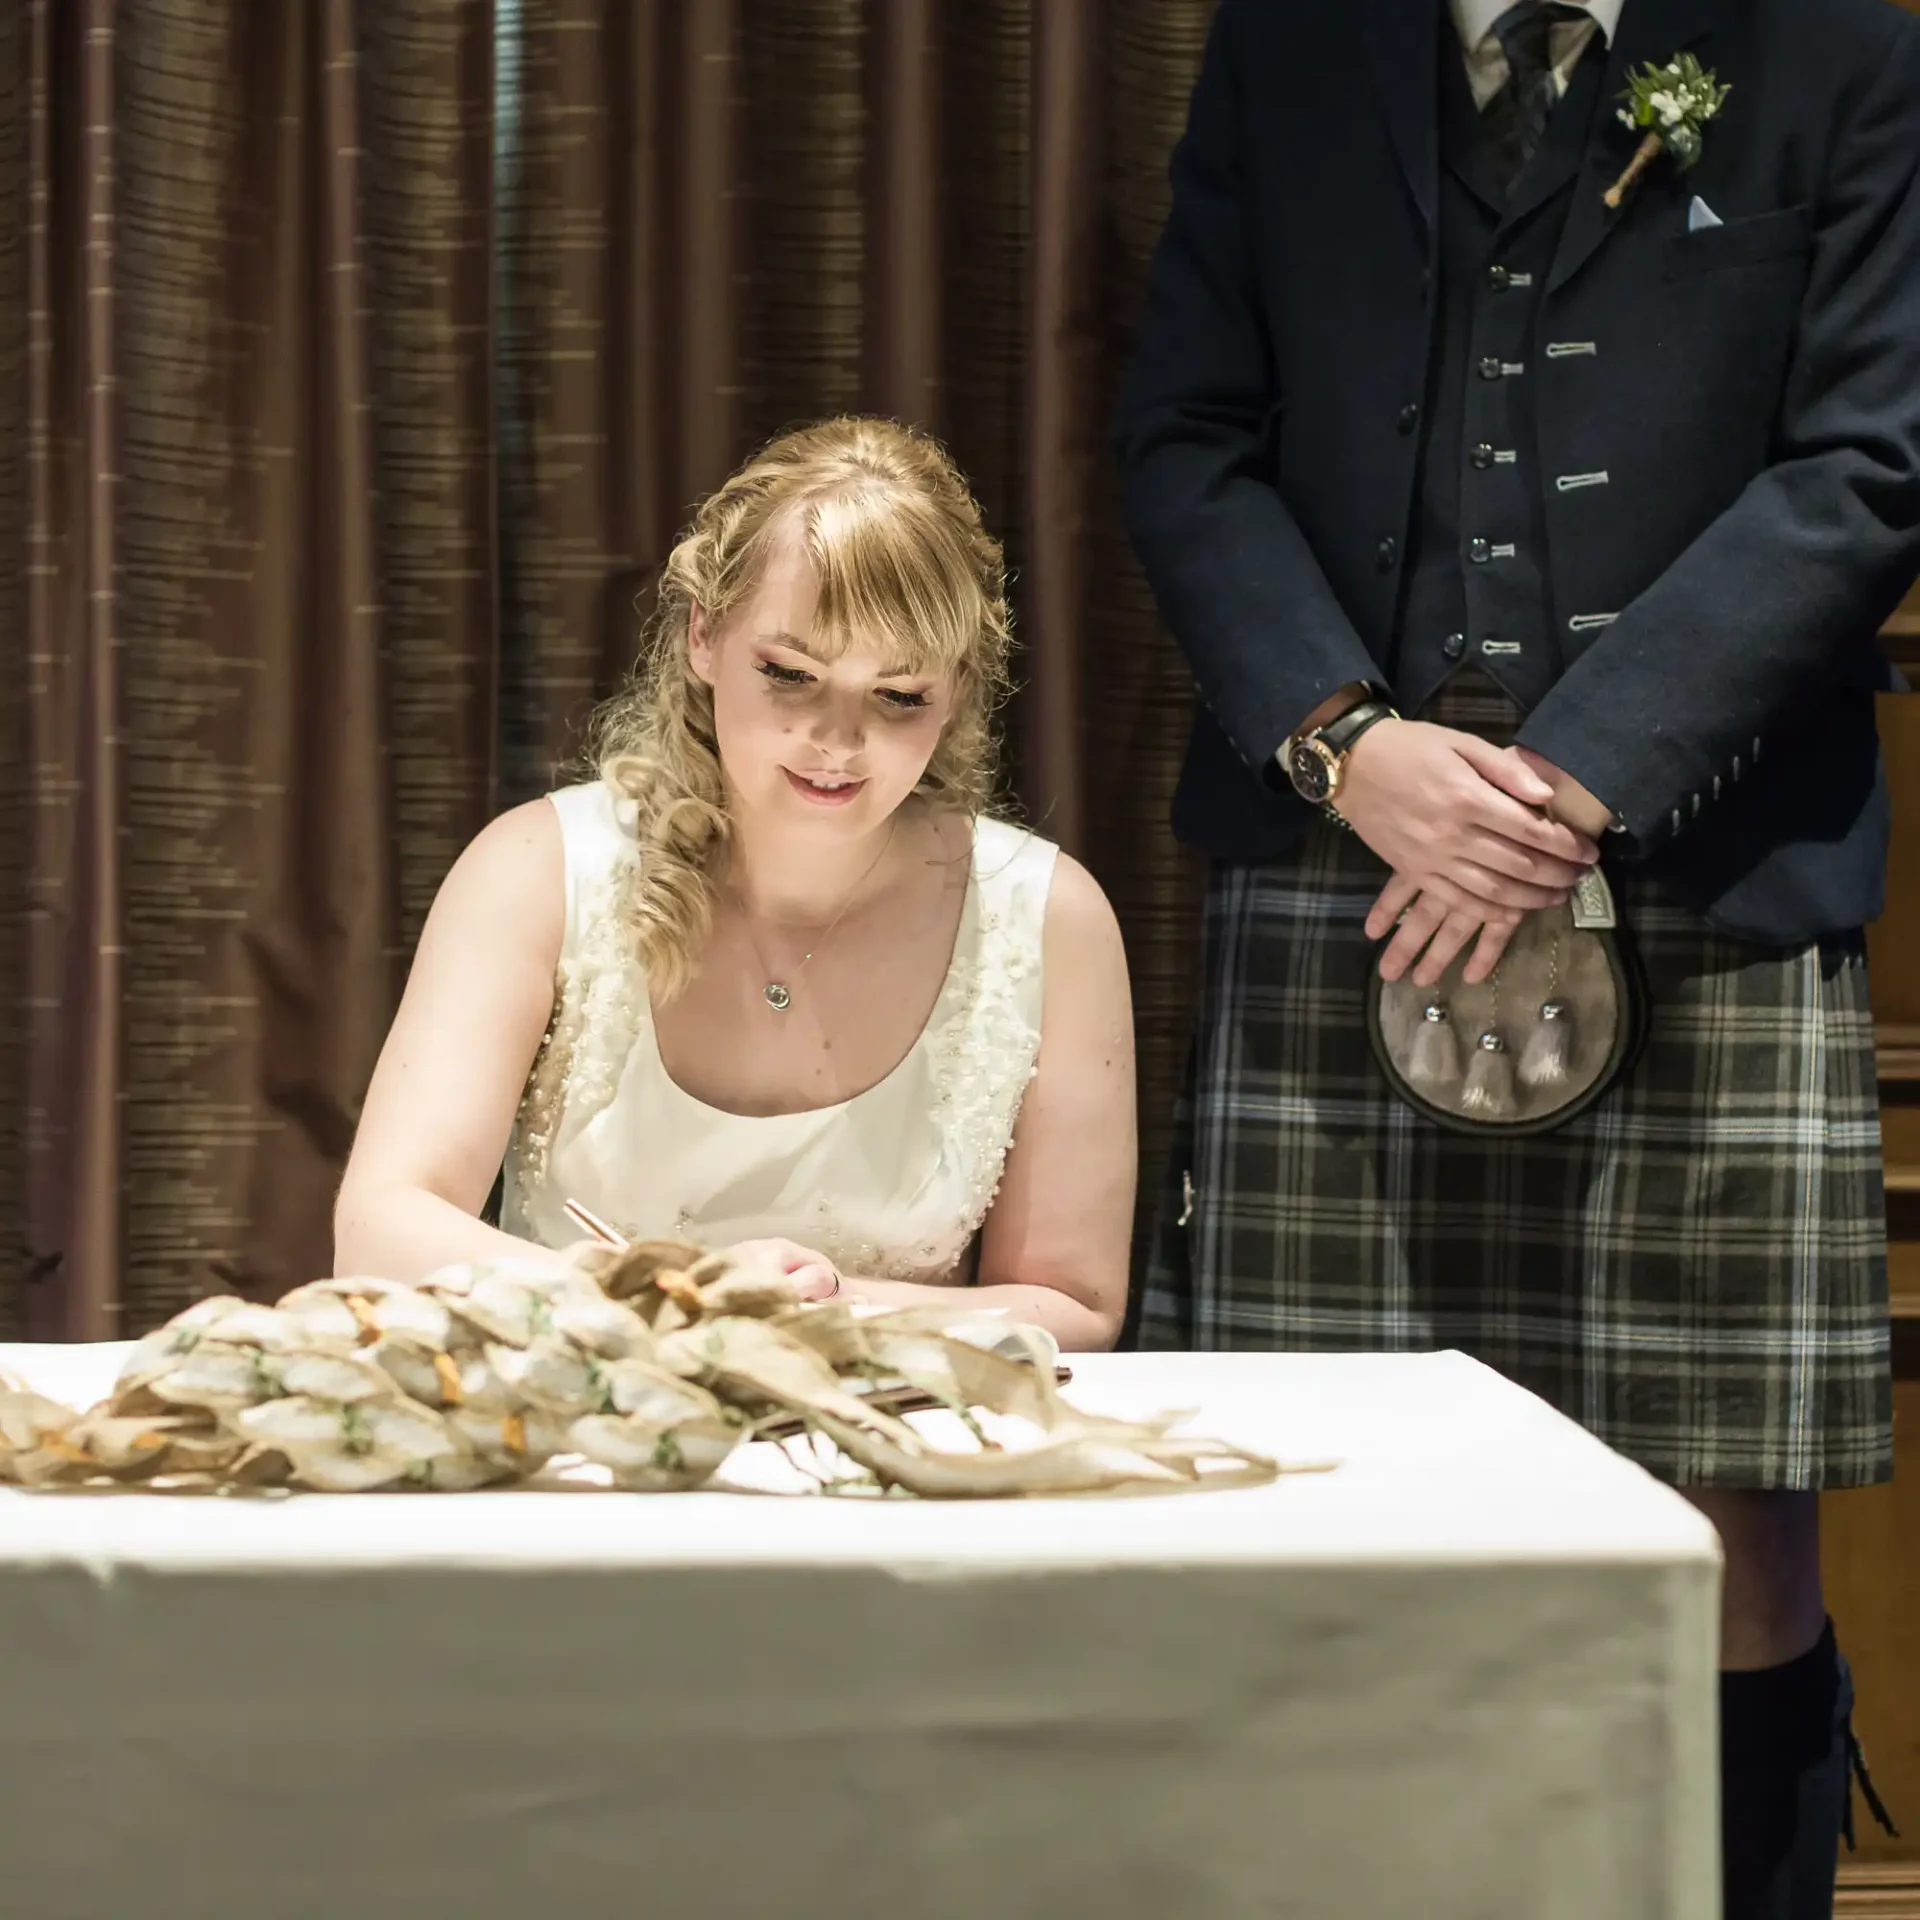 A woman in a white dress signs a document at a table with a bouquet in front of her, as a man in a kilt and suit jacket stands beside her.